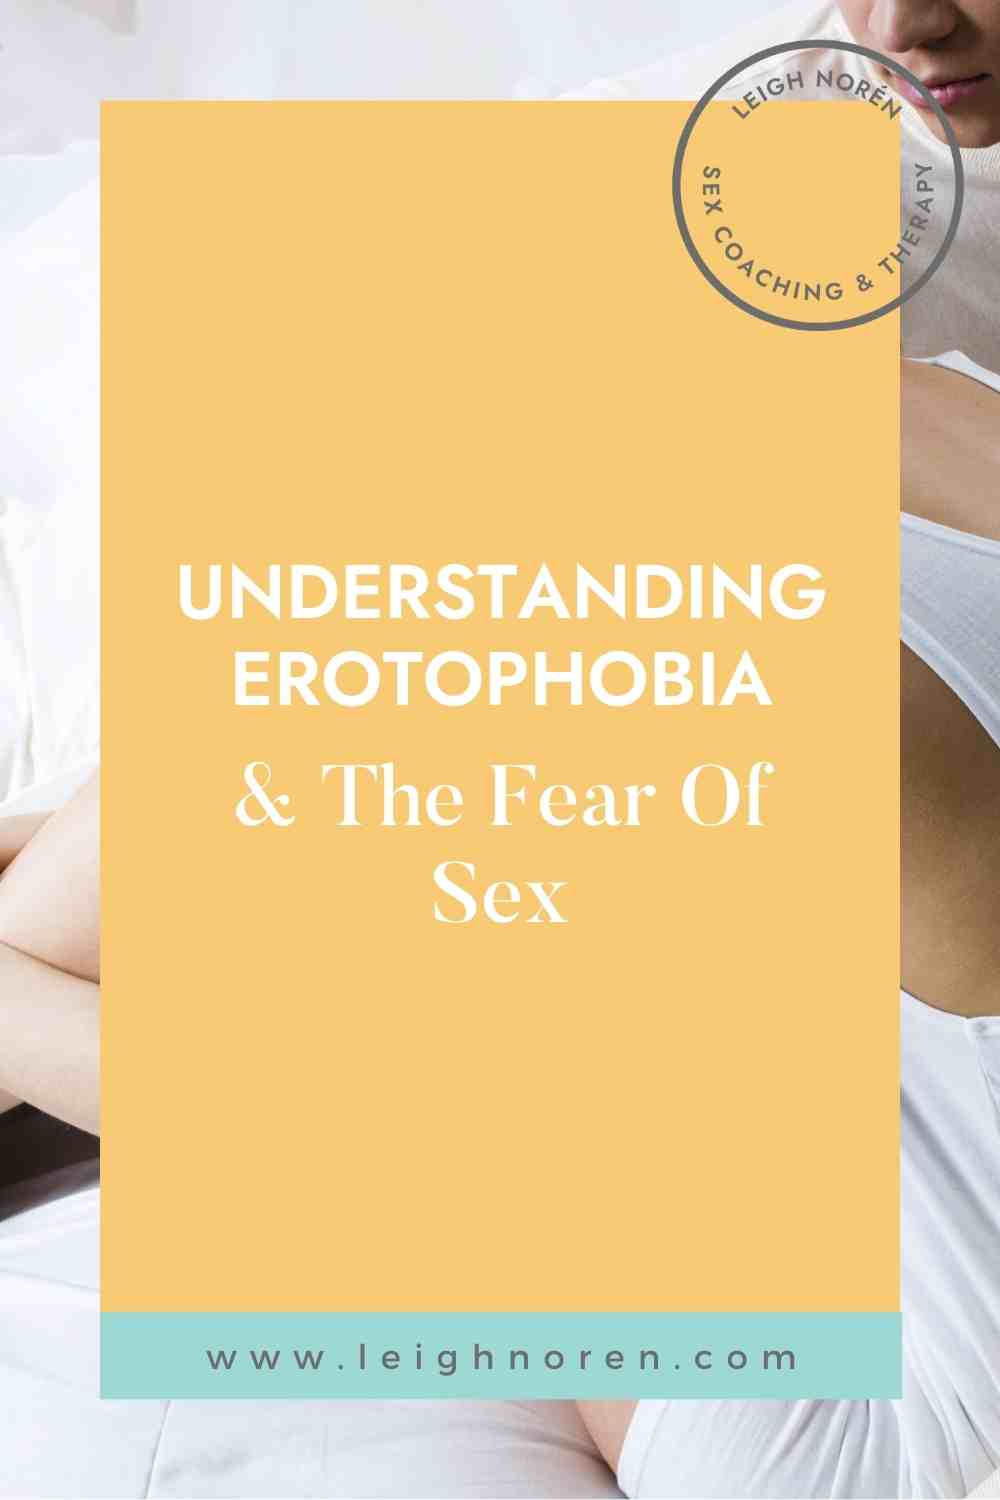 Understanding Erotophobia & The Fear Of Sex